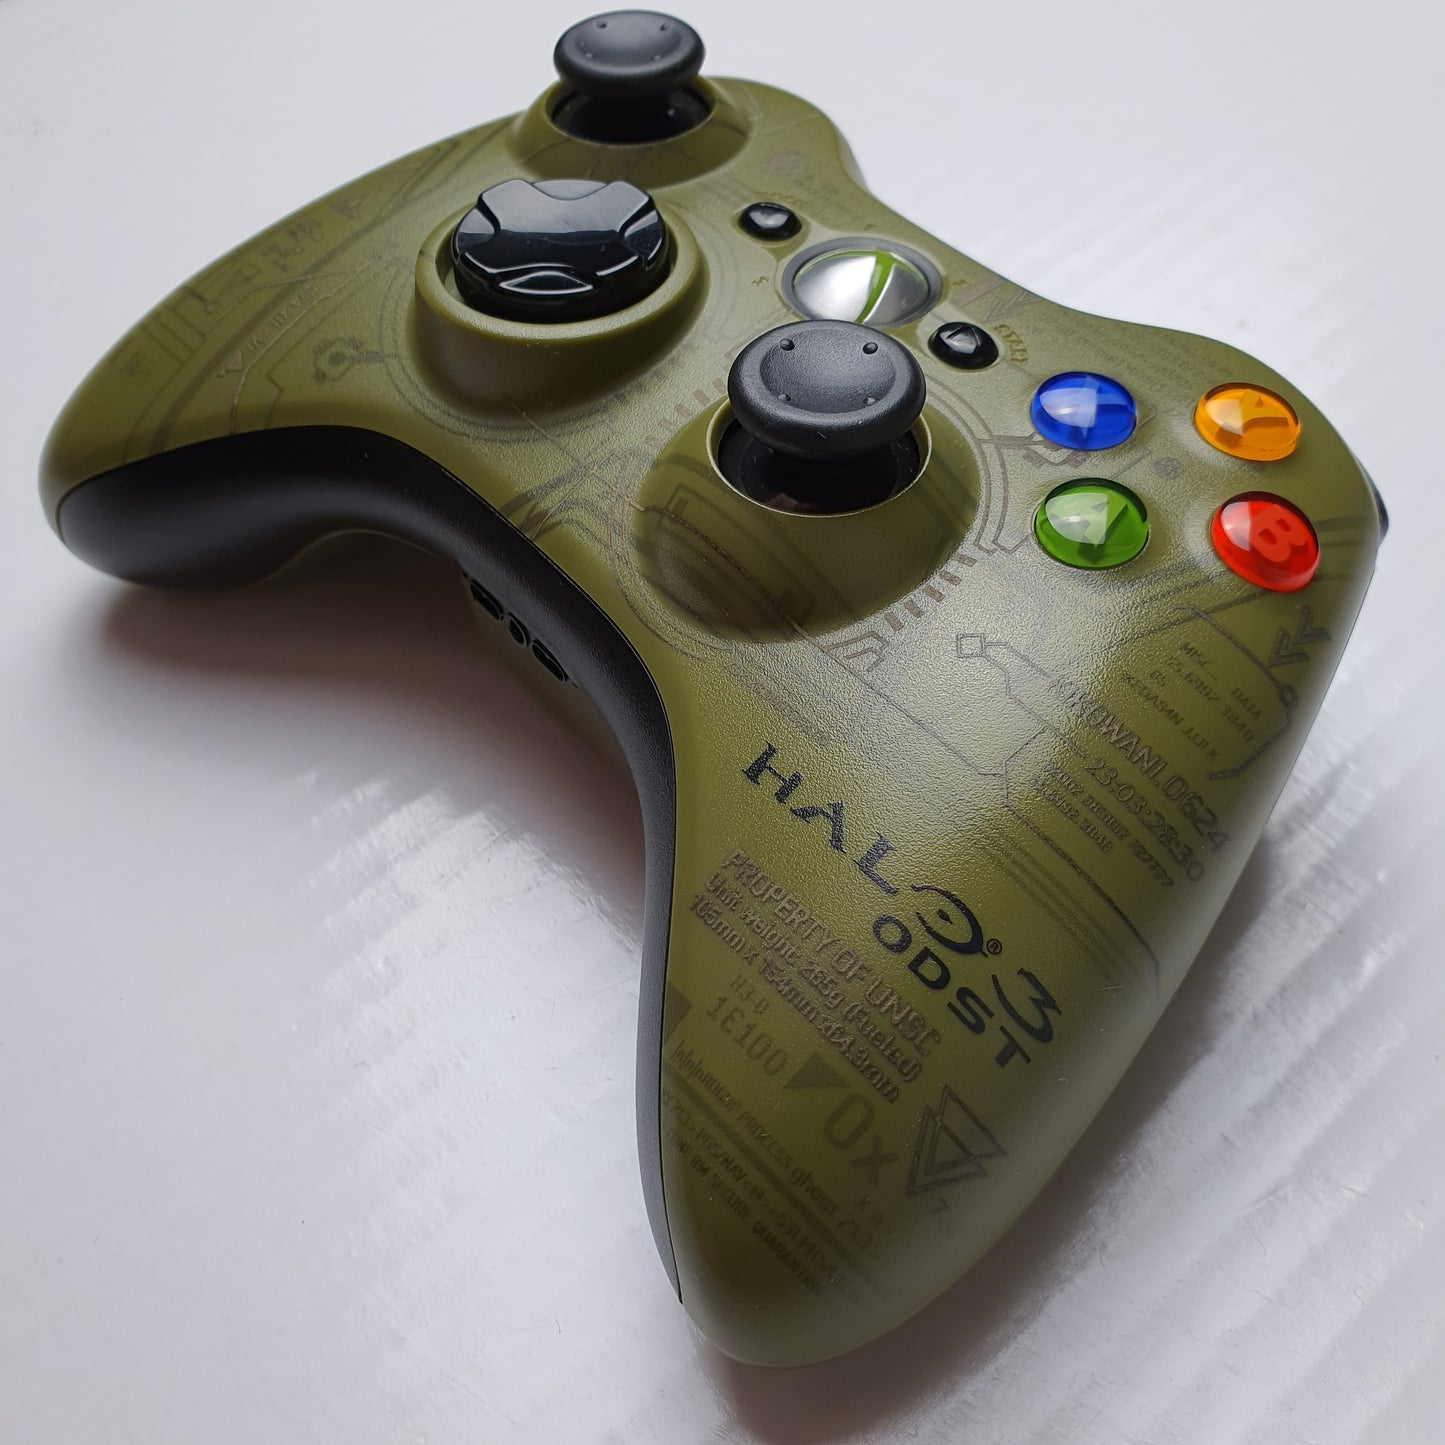 Official Microsoft Xbox 360 Limited Edition 'Halo 3: ODST' Wireless Controller